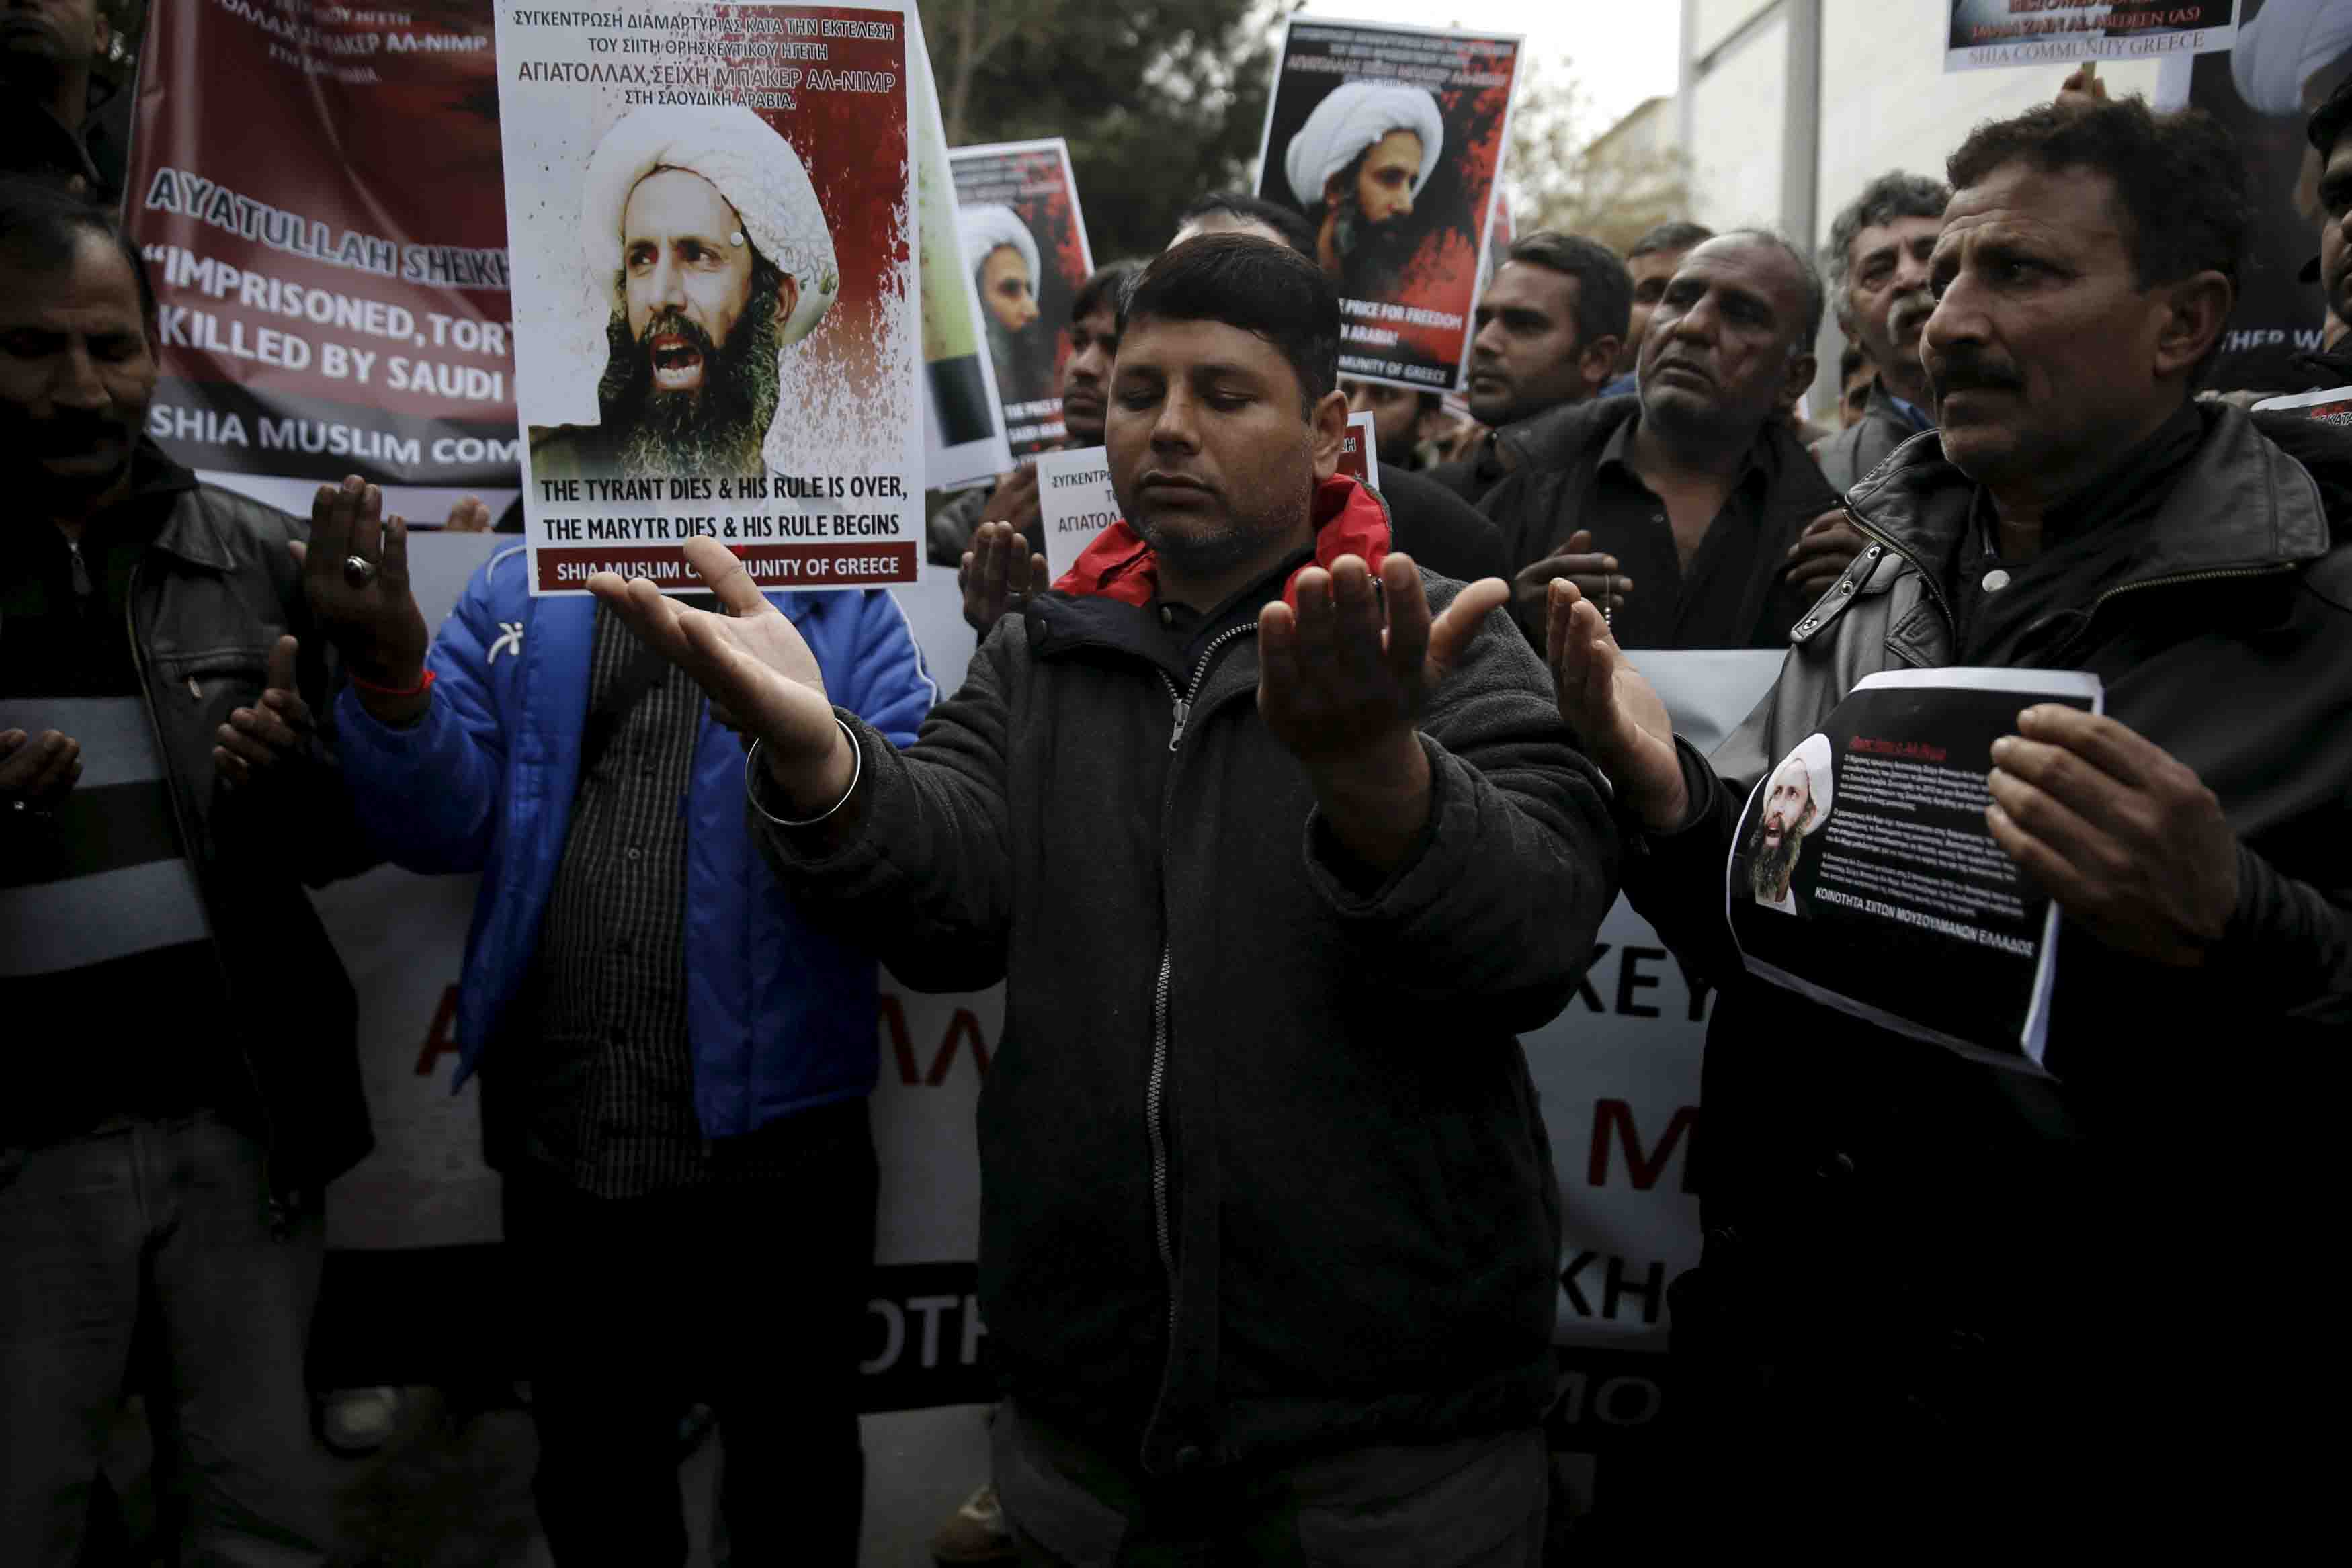 One of the leaders of the protest movement, Shiite cleric Nimr al-Nimr, was executed in 2016 on a terrorism indictment.